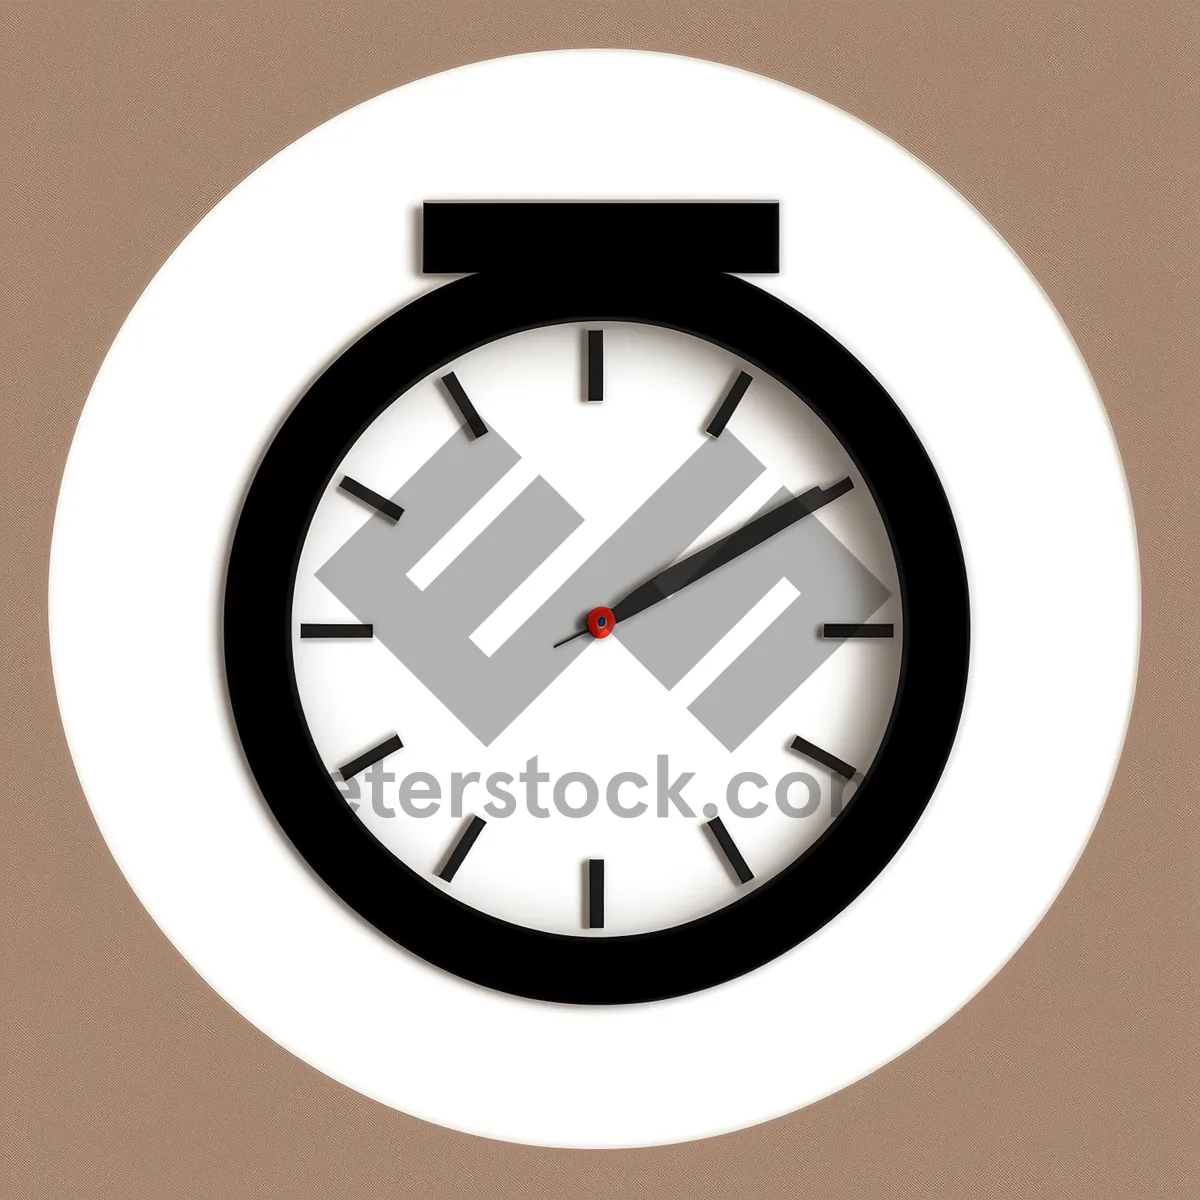 Picture of Analog Wall Clock with Black Circle Dial